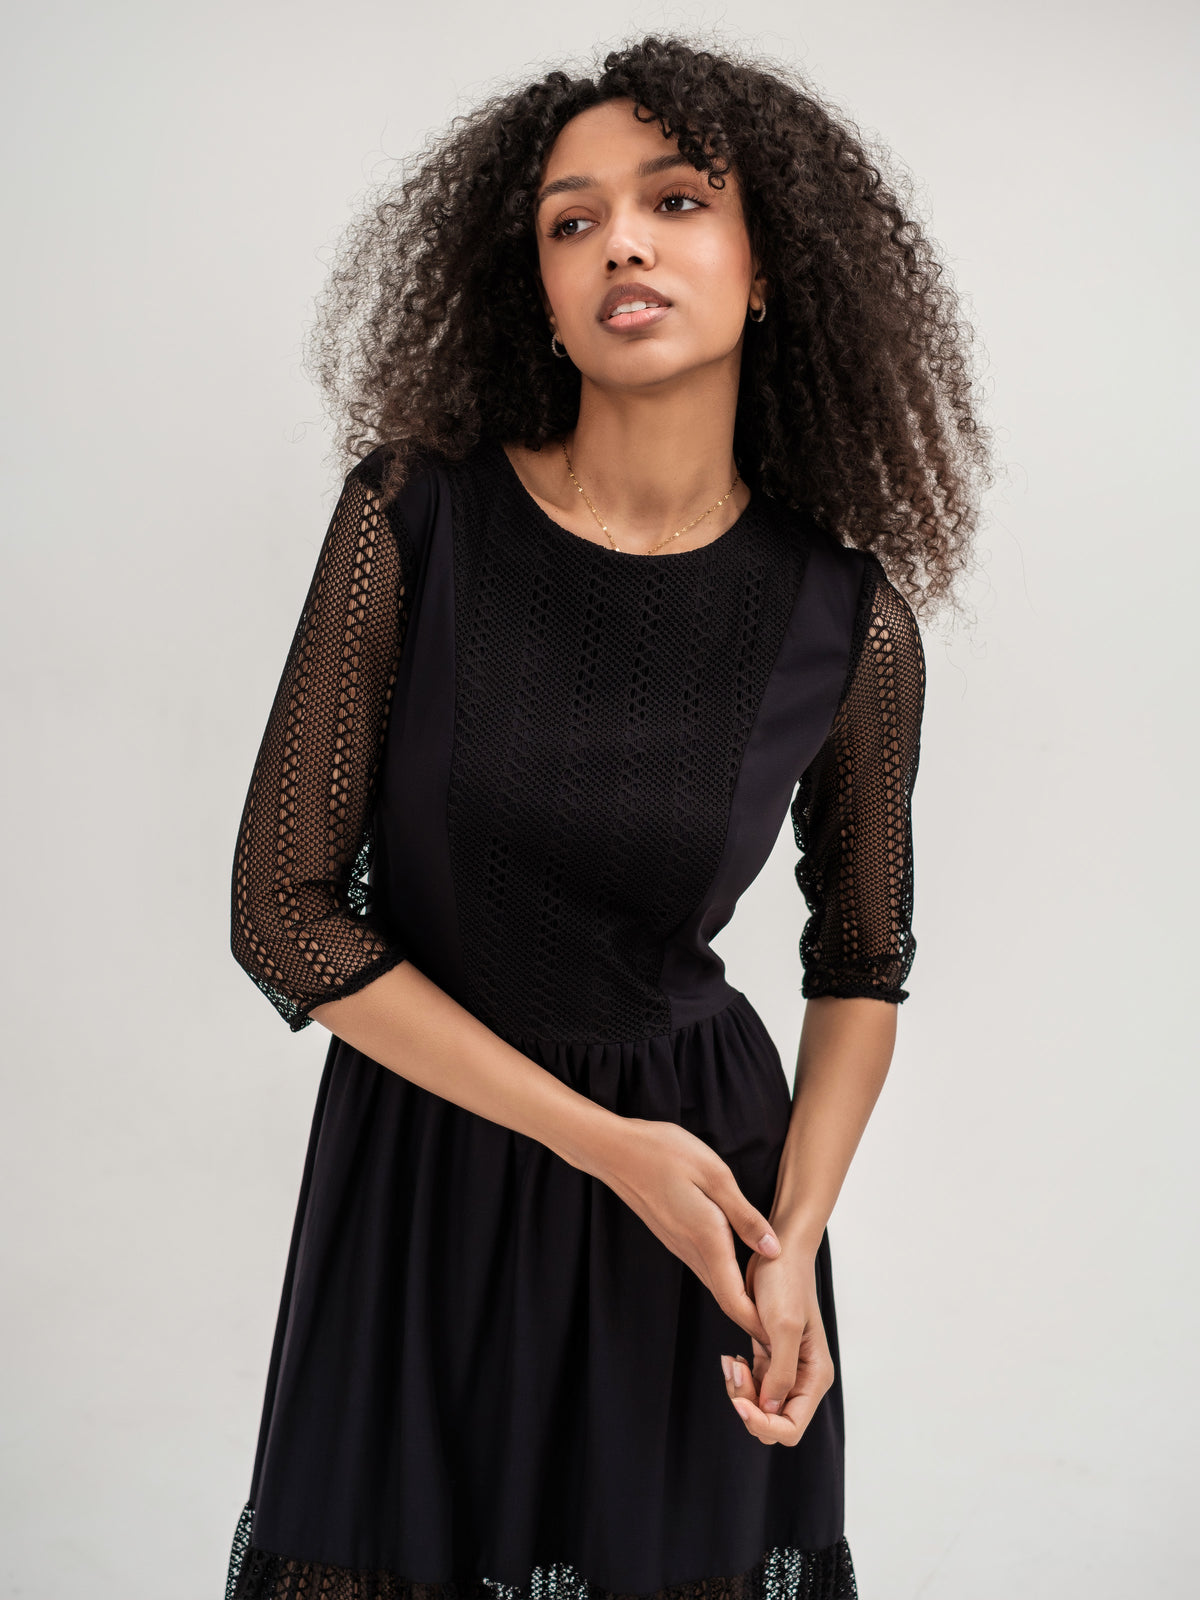 Black midi dress with lace accents 3/4 sleeve fitted top